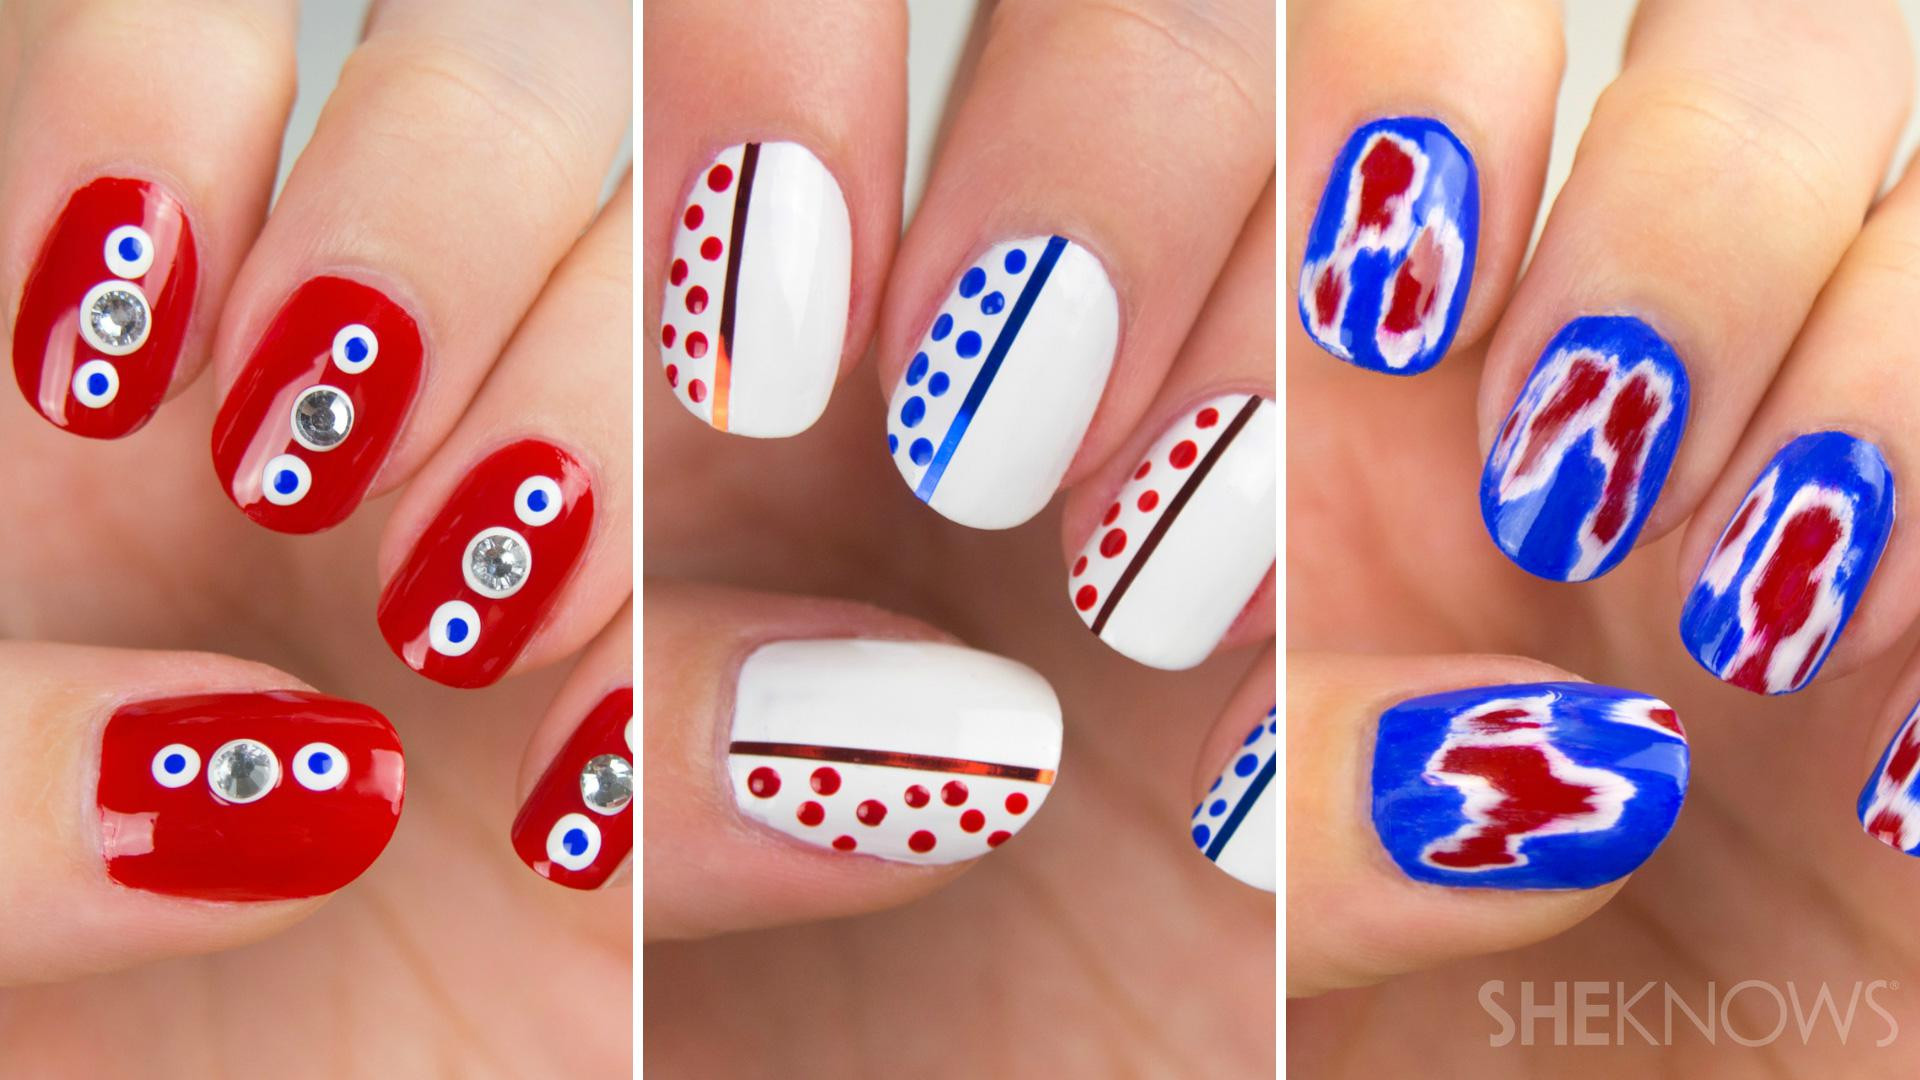 Red White Blue Nail Art
 Amazing red white and blue nail art